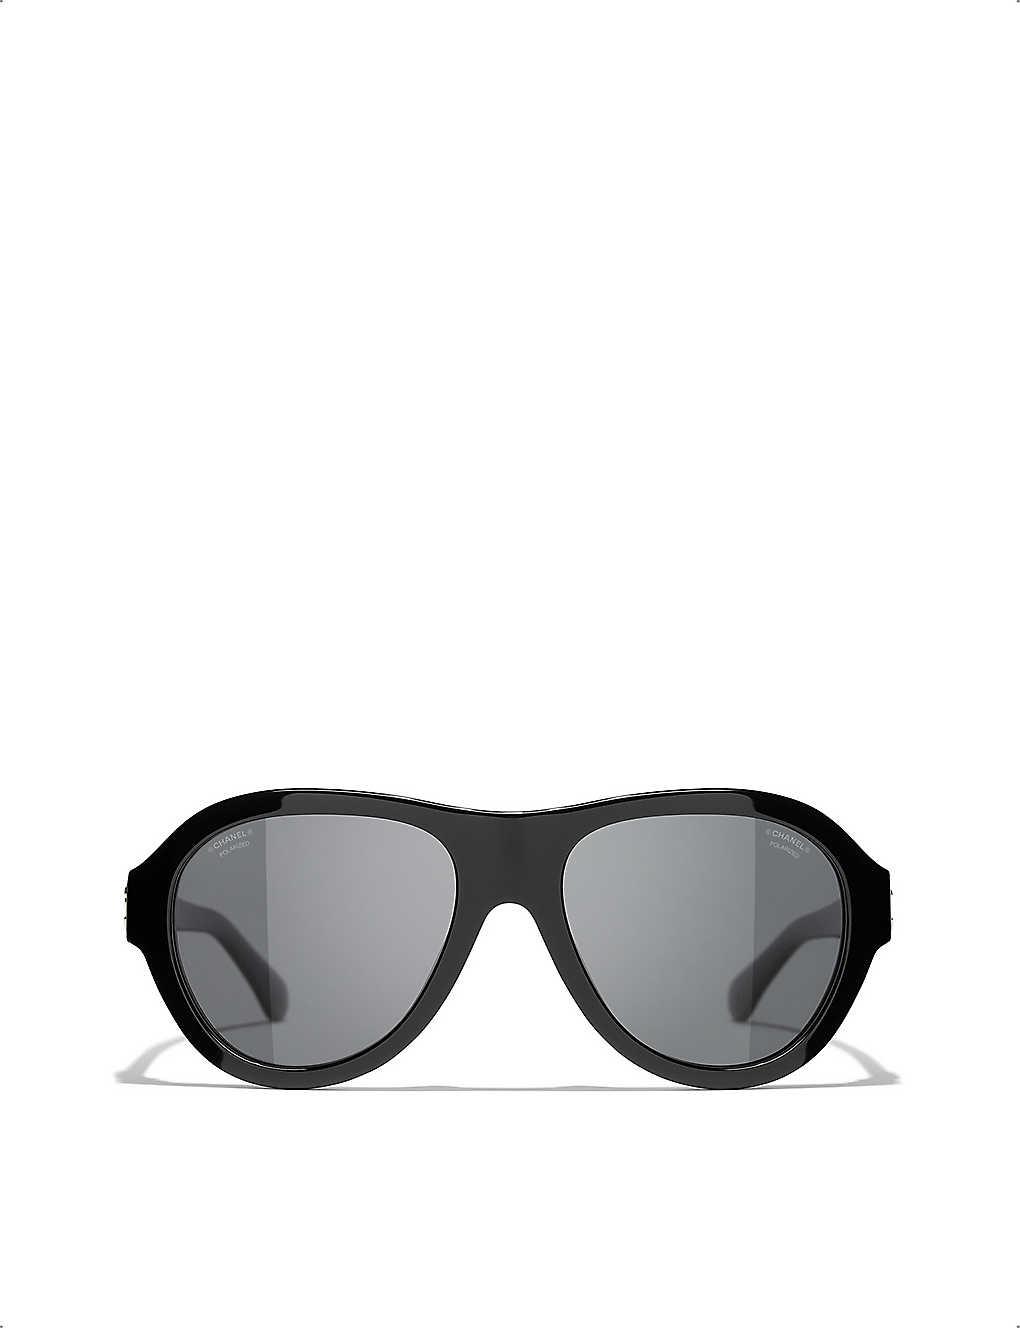 Chanel Ch5467b Crystal-embellished Acetate Pilot Sunglasses in Black